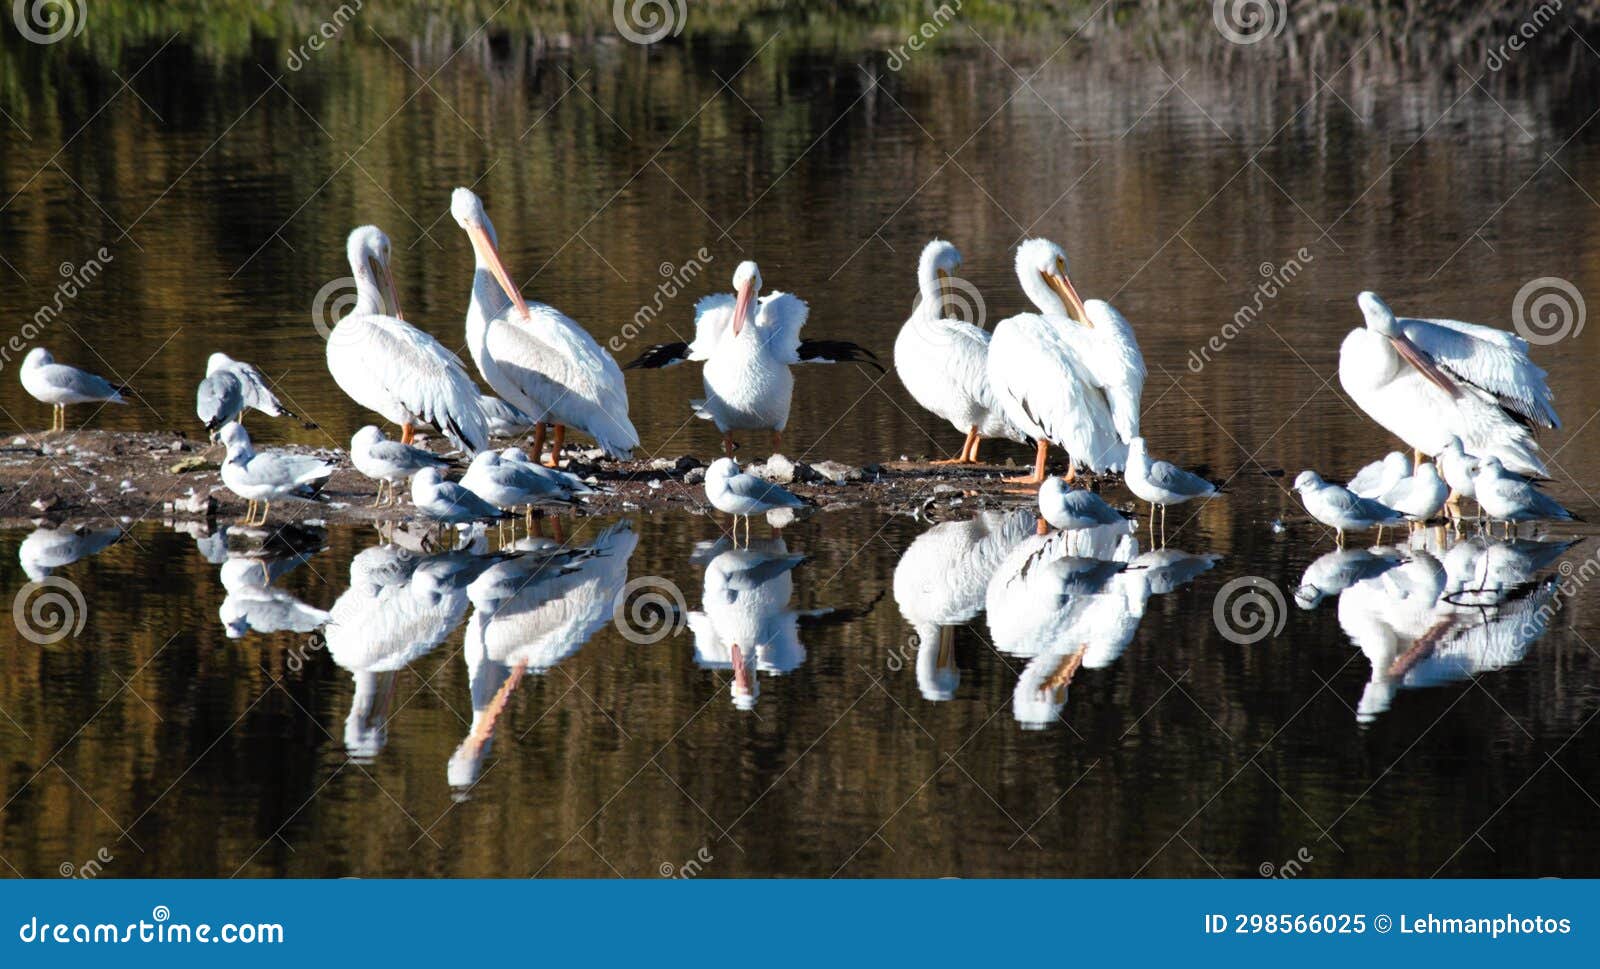 white pelican reflection roost